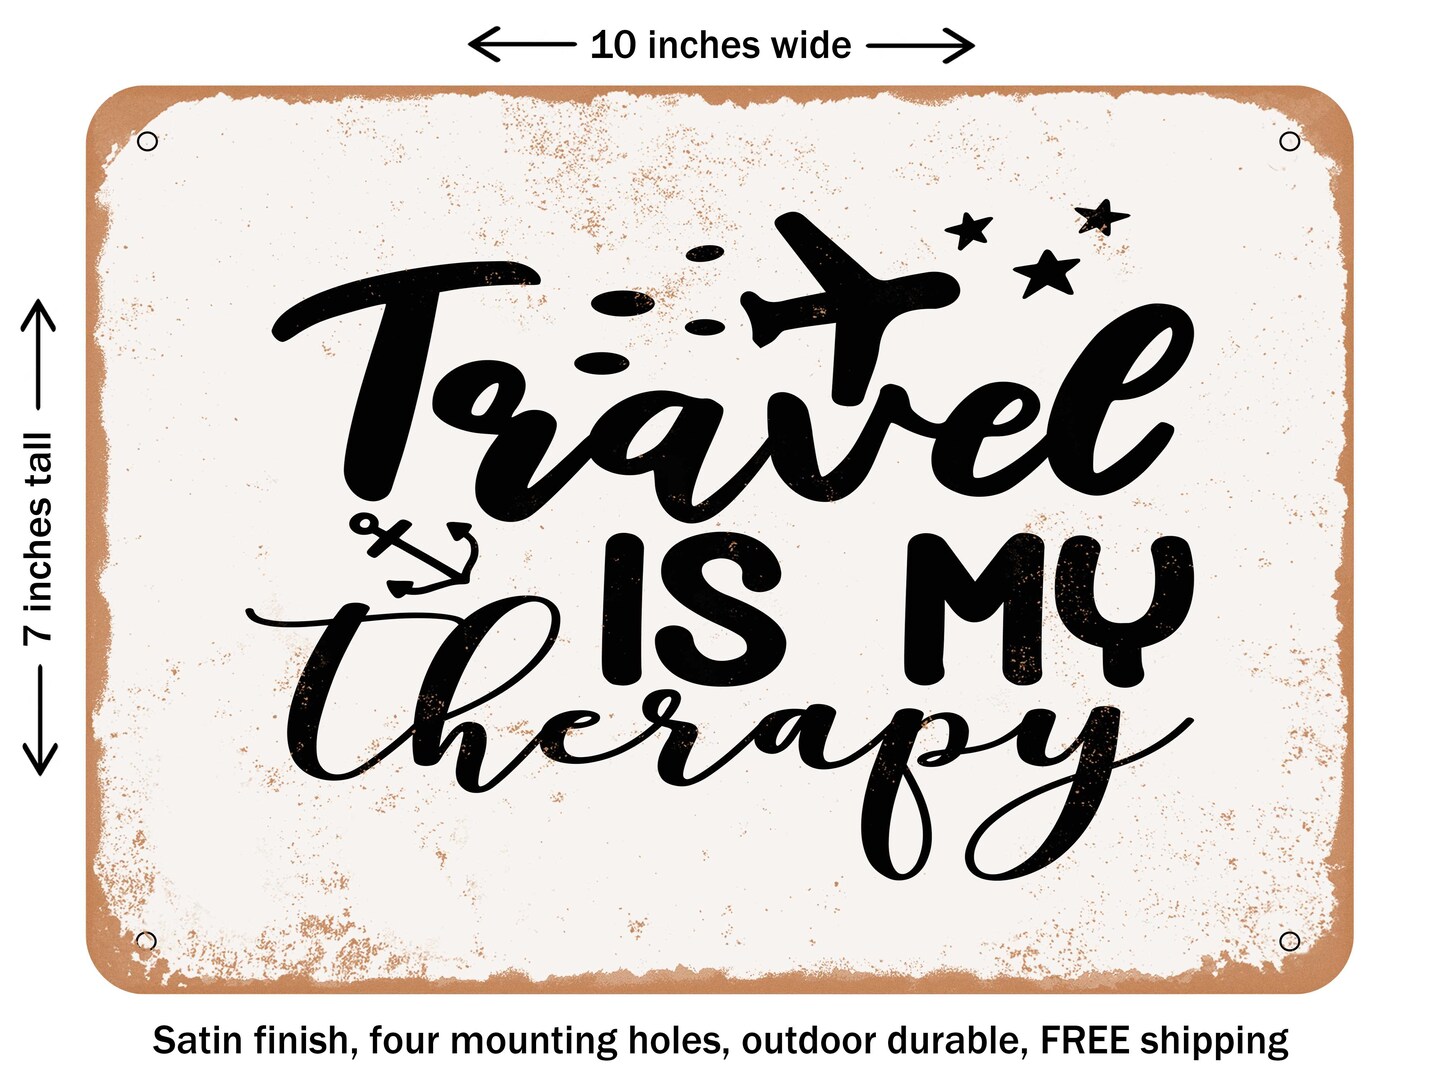 DECORATIVE METAL SIGN - Travel is My therapy - Vintage Rusty Look